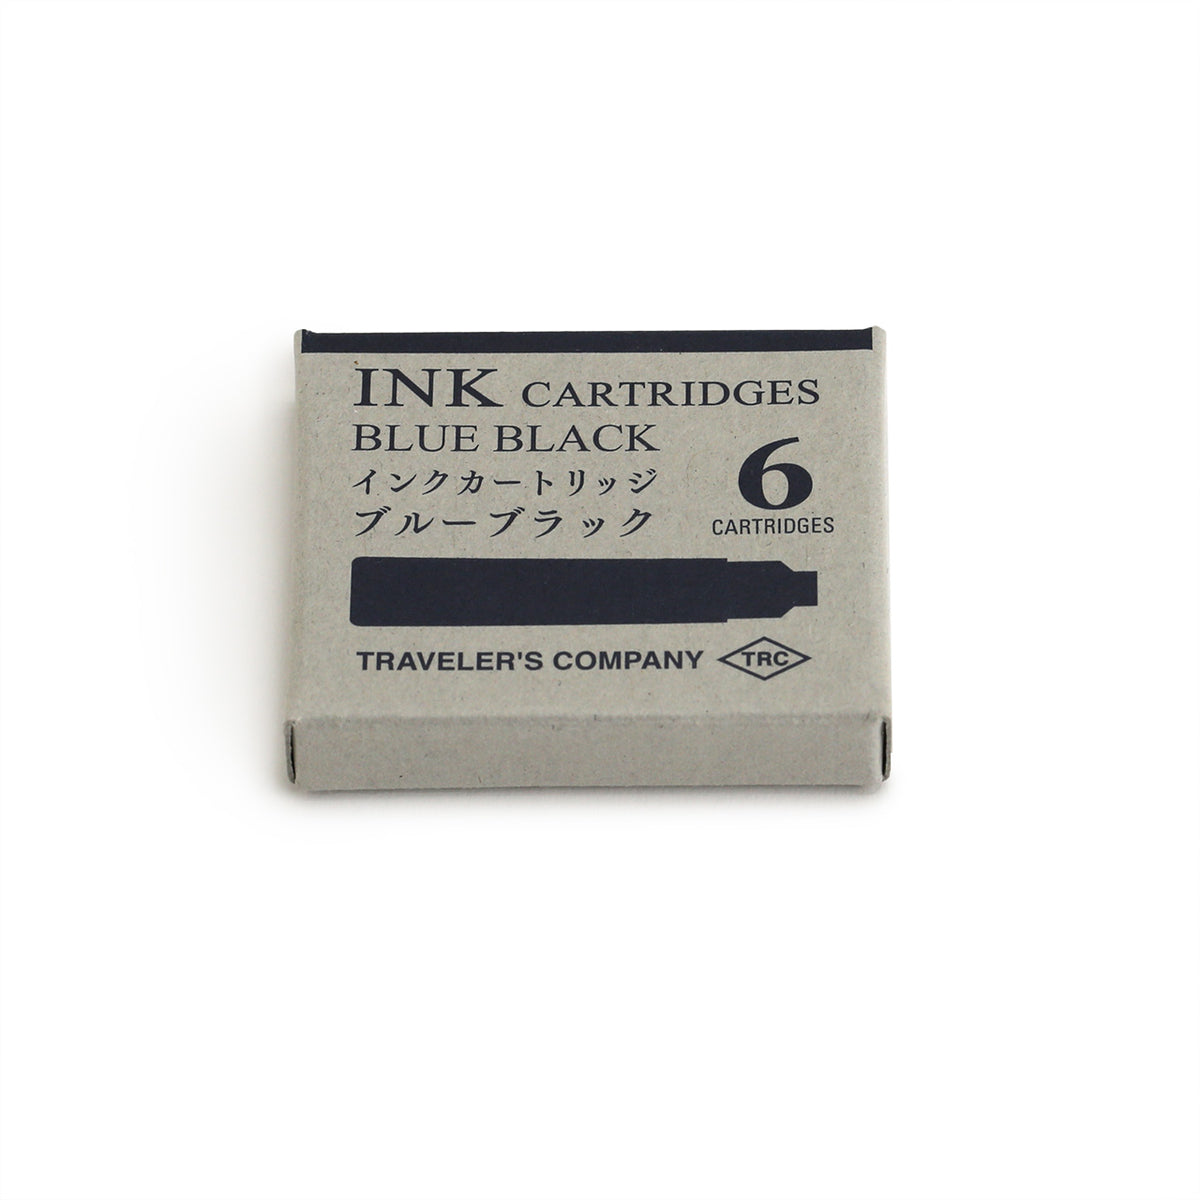 small box containing six blue-black ink cartridges